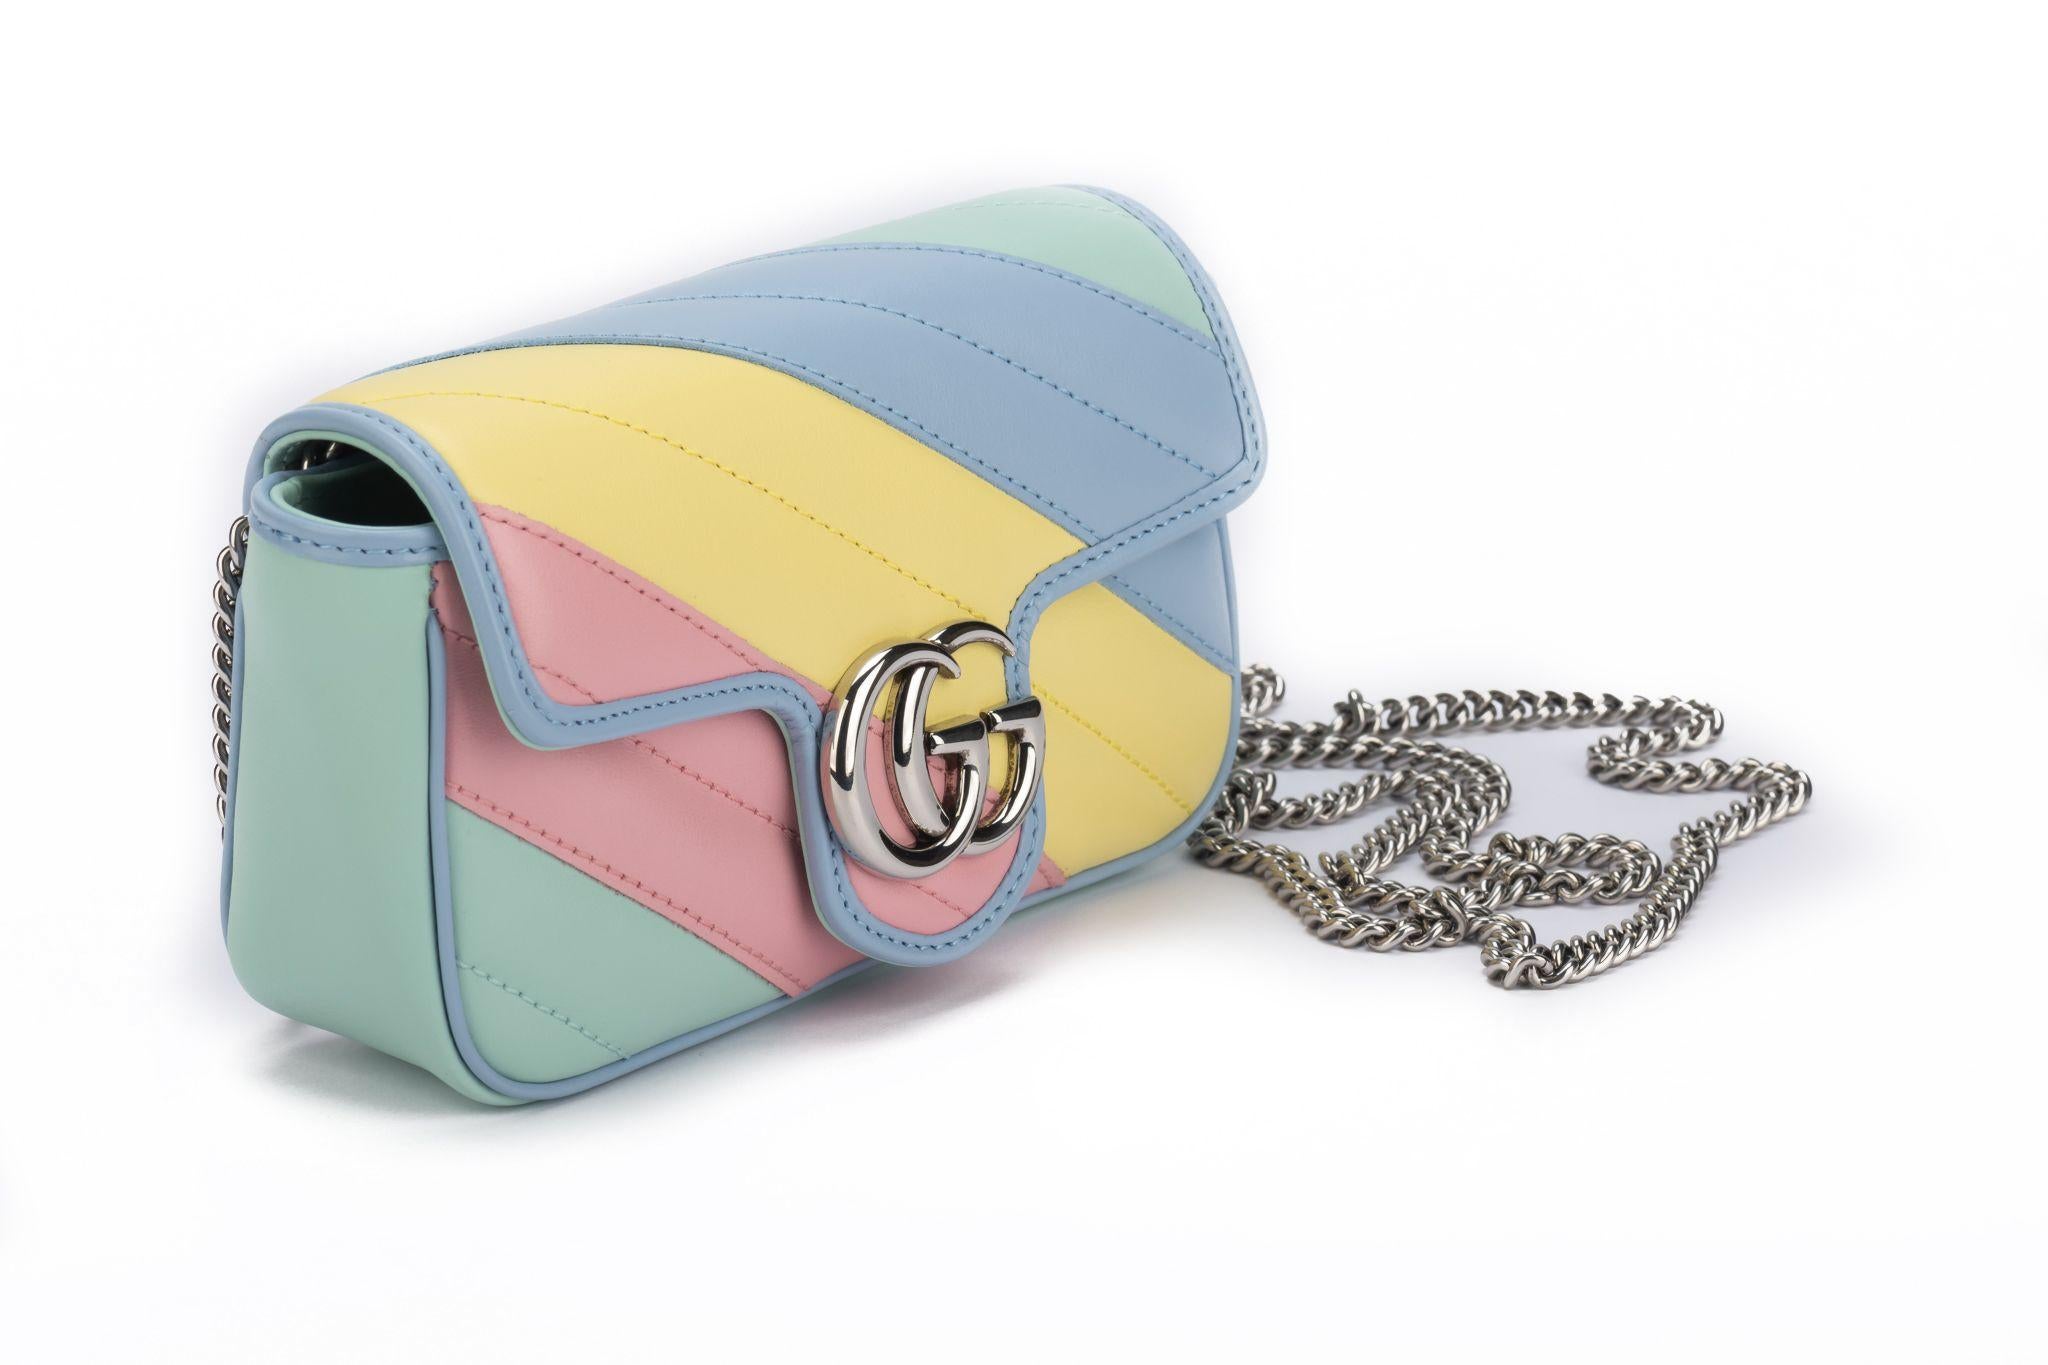 Gucci new in box limited edition rainbow small Marmont Cross body bag . Pastel colors and diagonal quilting. Detachable silver shoulder chain, drop 23”. Comes with booklet, original dust cover and box.